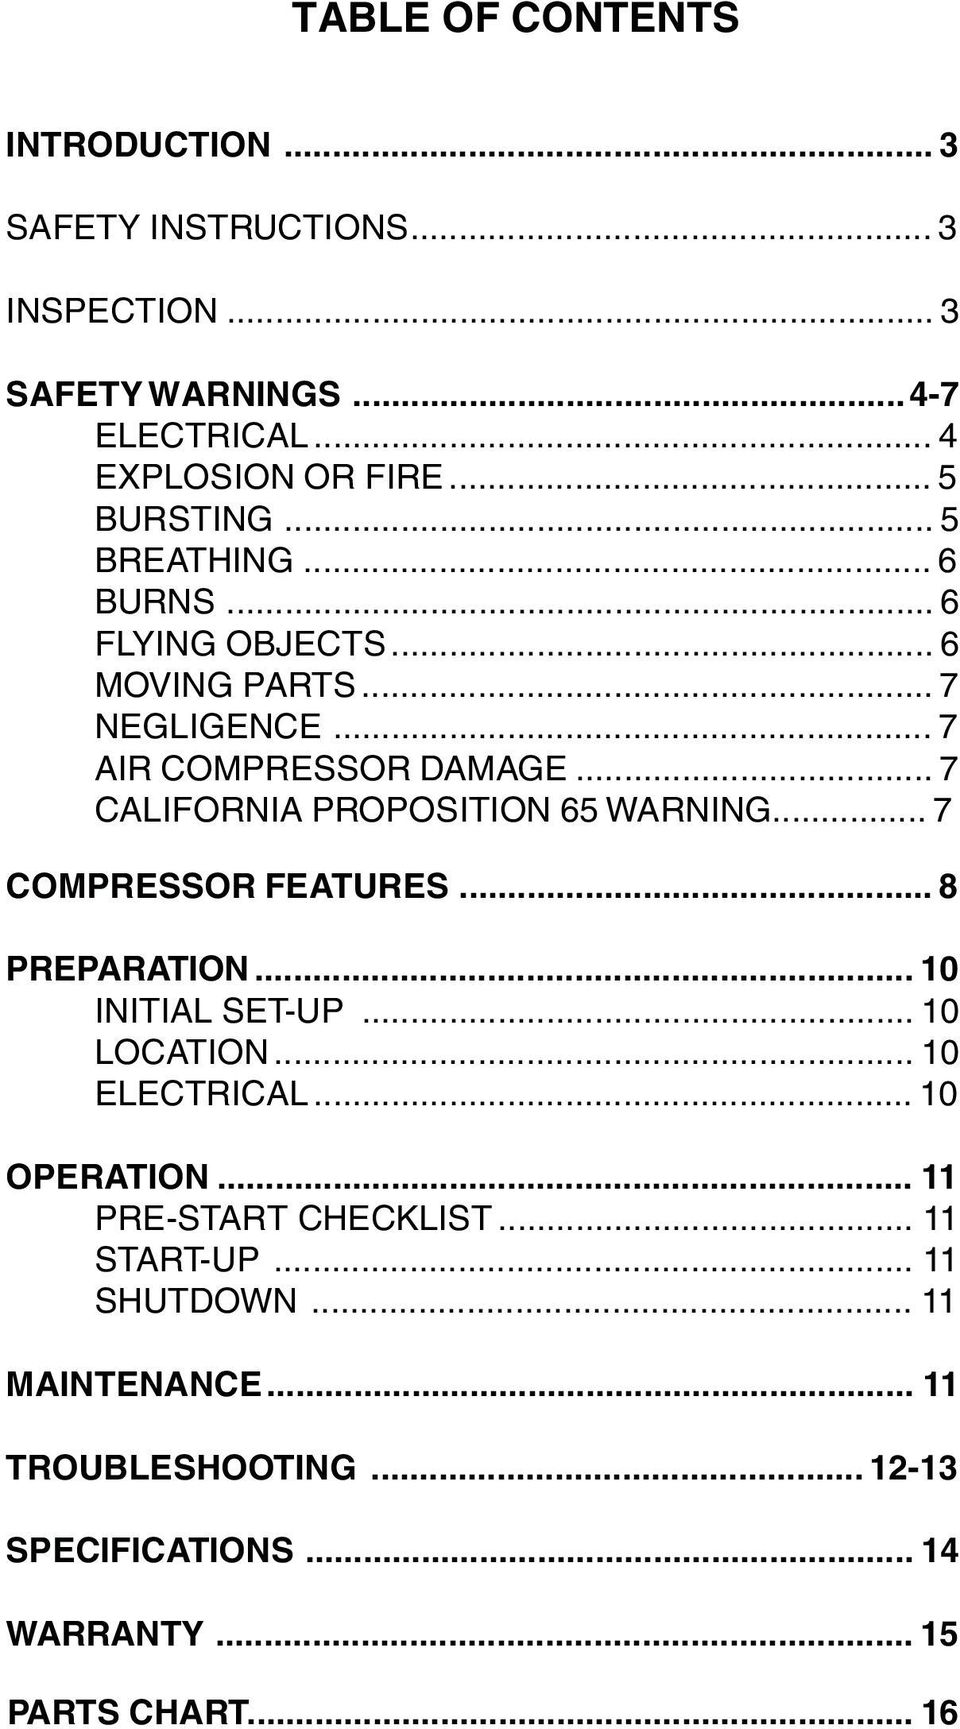 .. 7 CALIFORNIA PROPOSITION 65 WARNING... 7 COMPRESSOR FEATURES... 8 PREPARATION... 10 INITIAL SET-UP...10 LOCATION... 10 ELECTRICAL.